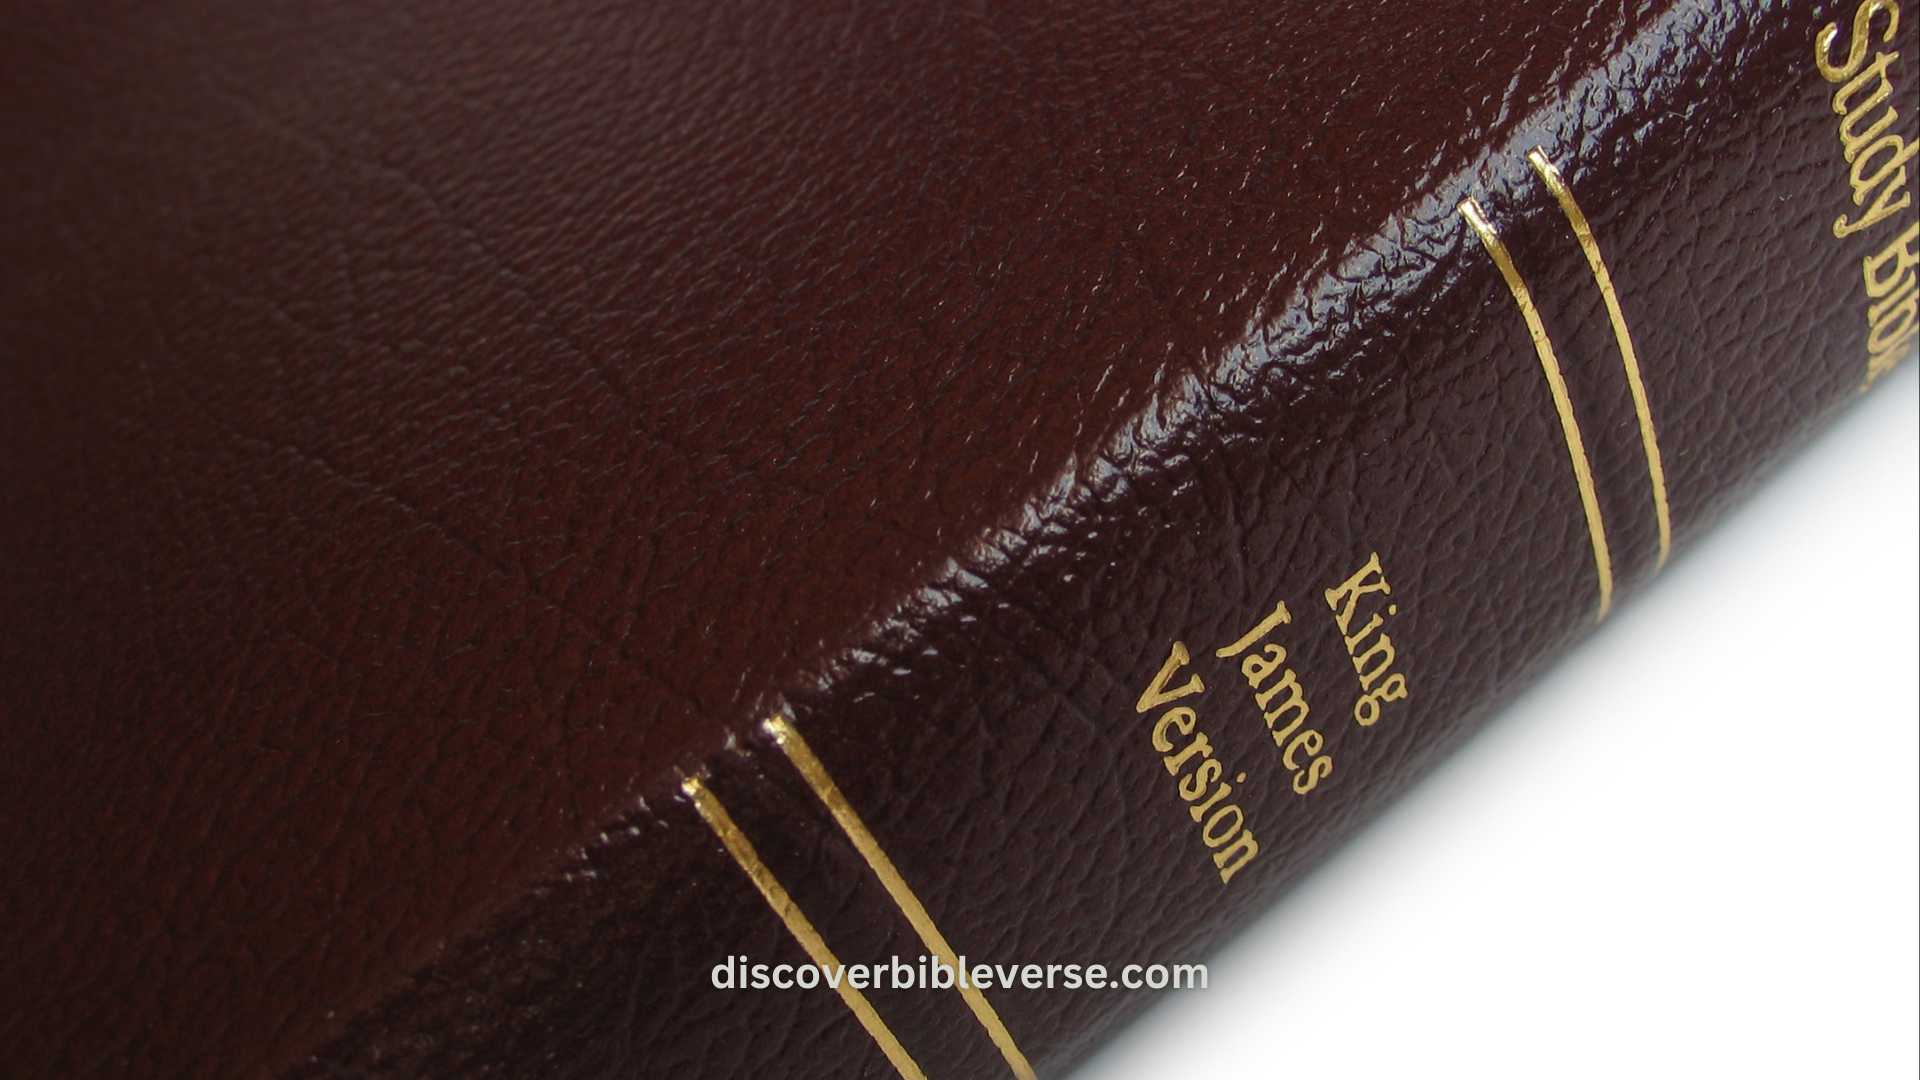 What are the Key Differences Between the Sinai Bible and the King James Version?